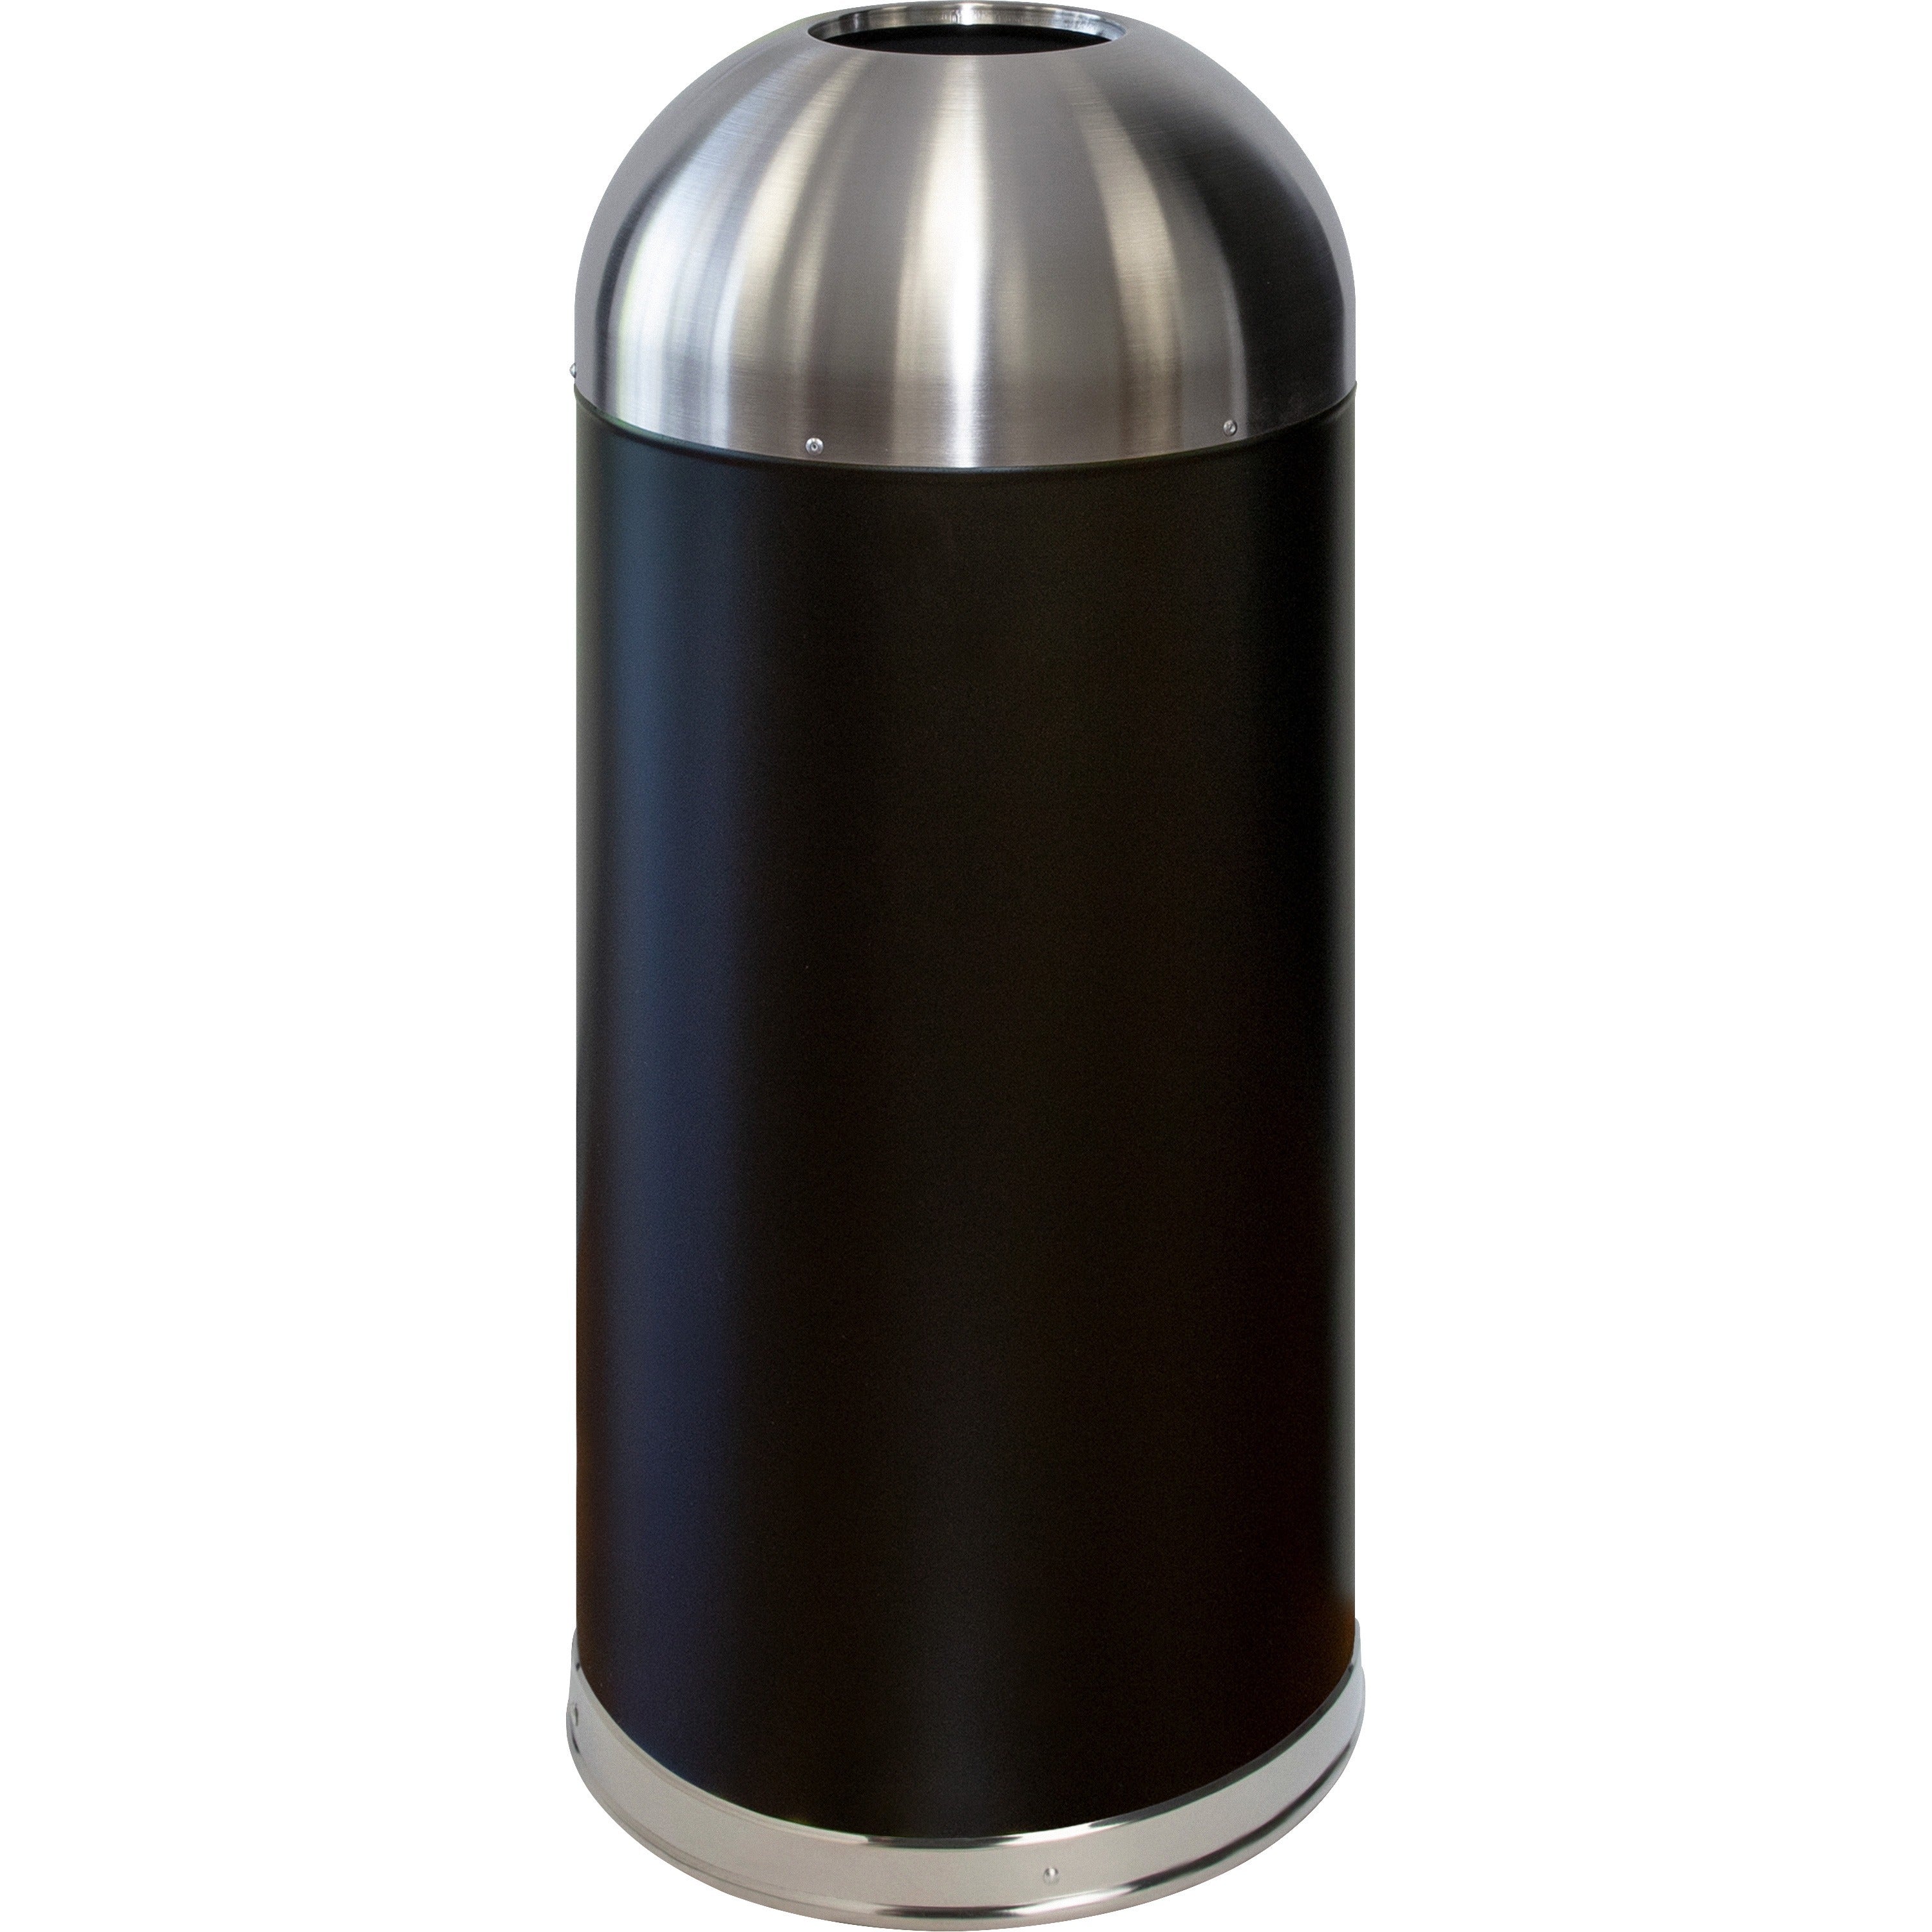 Genuine Joe 15 Gallon Dome Top Trash Receptacle - 15 gal Capacity - Durable, Powder Coated, Easy to Clean - 40" Height x 16.5" Diameter - Stainless Steel - Black, Silver - 1 Each - 